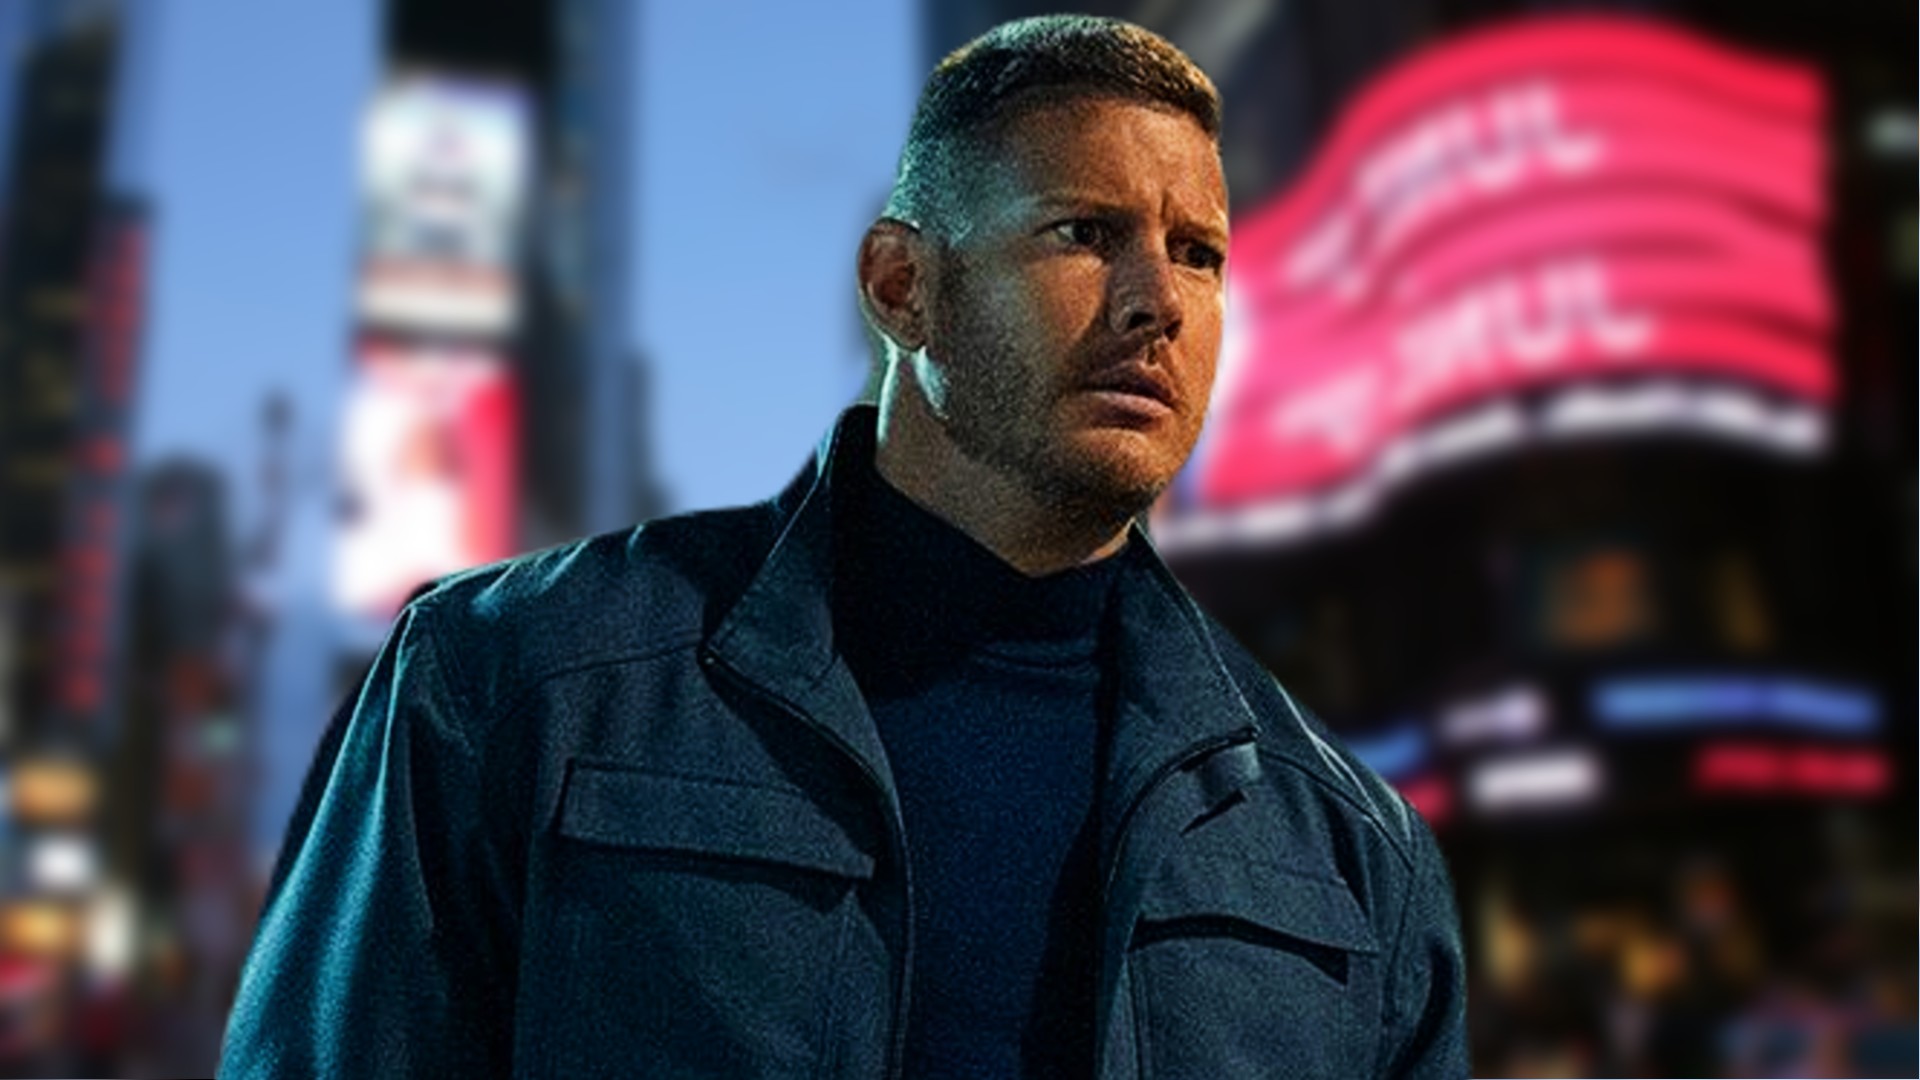 trone strå Opdage The Umbrella Academy': Tom Hopper Teases Luther's Future in Season 3